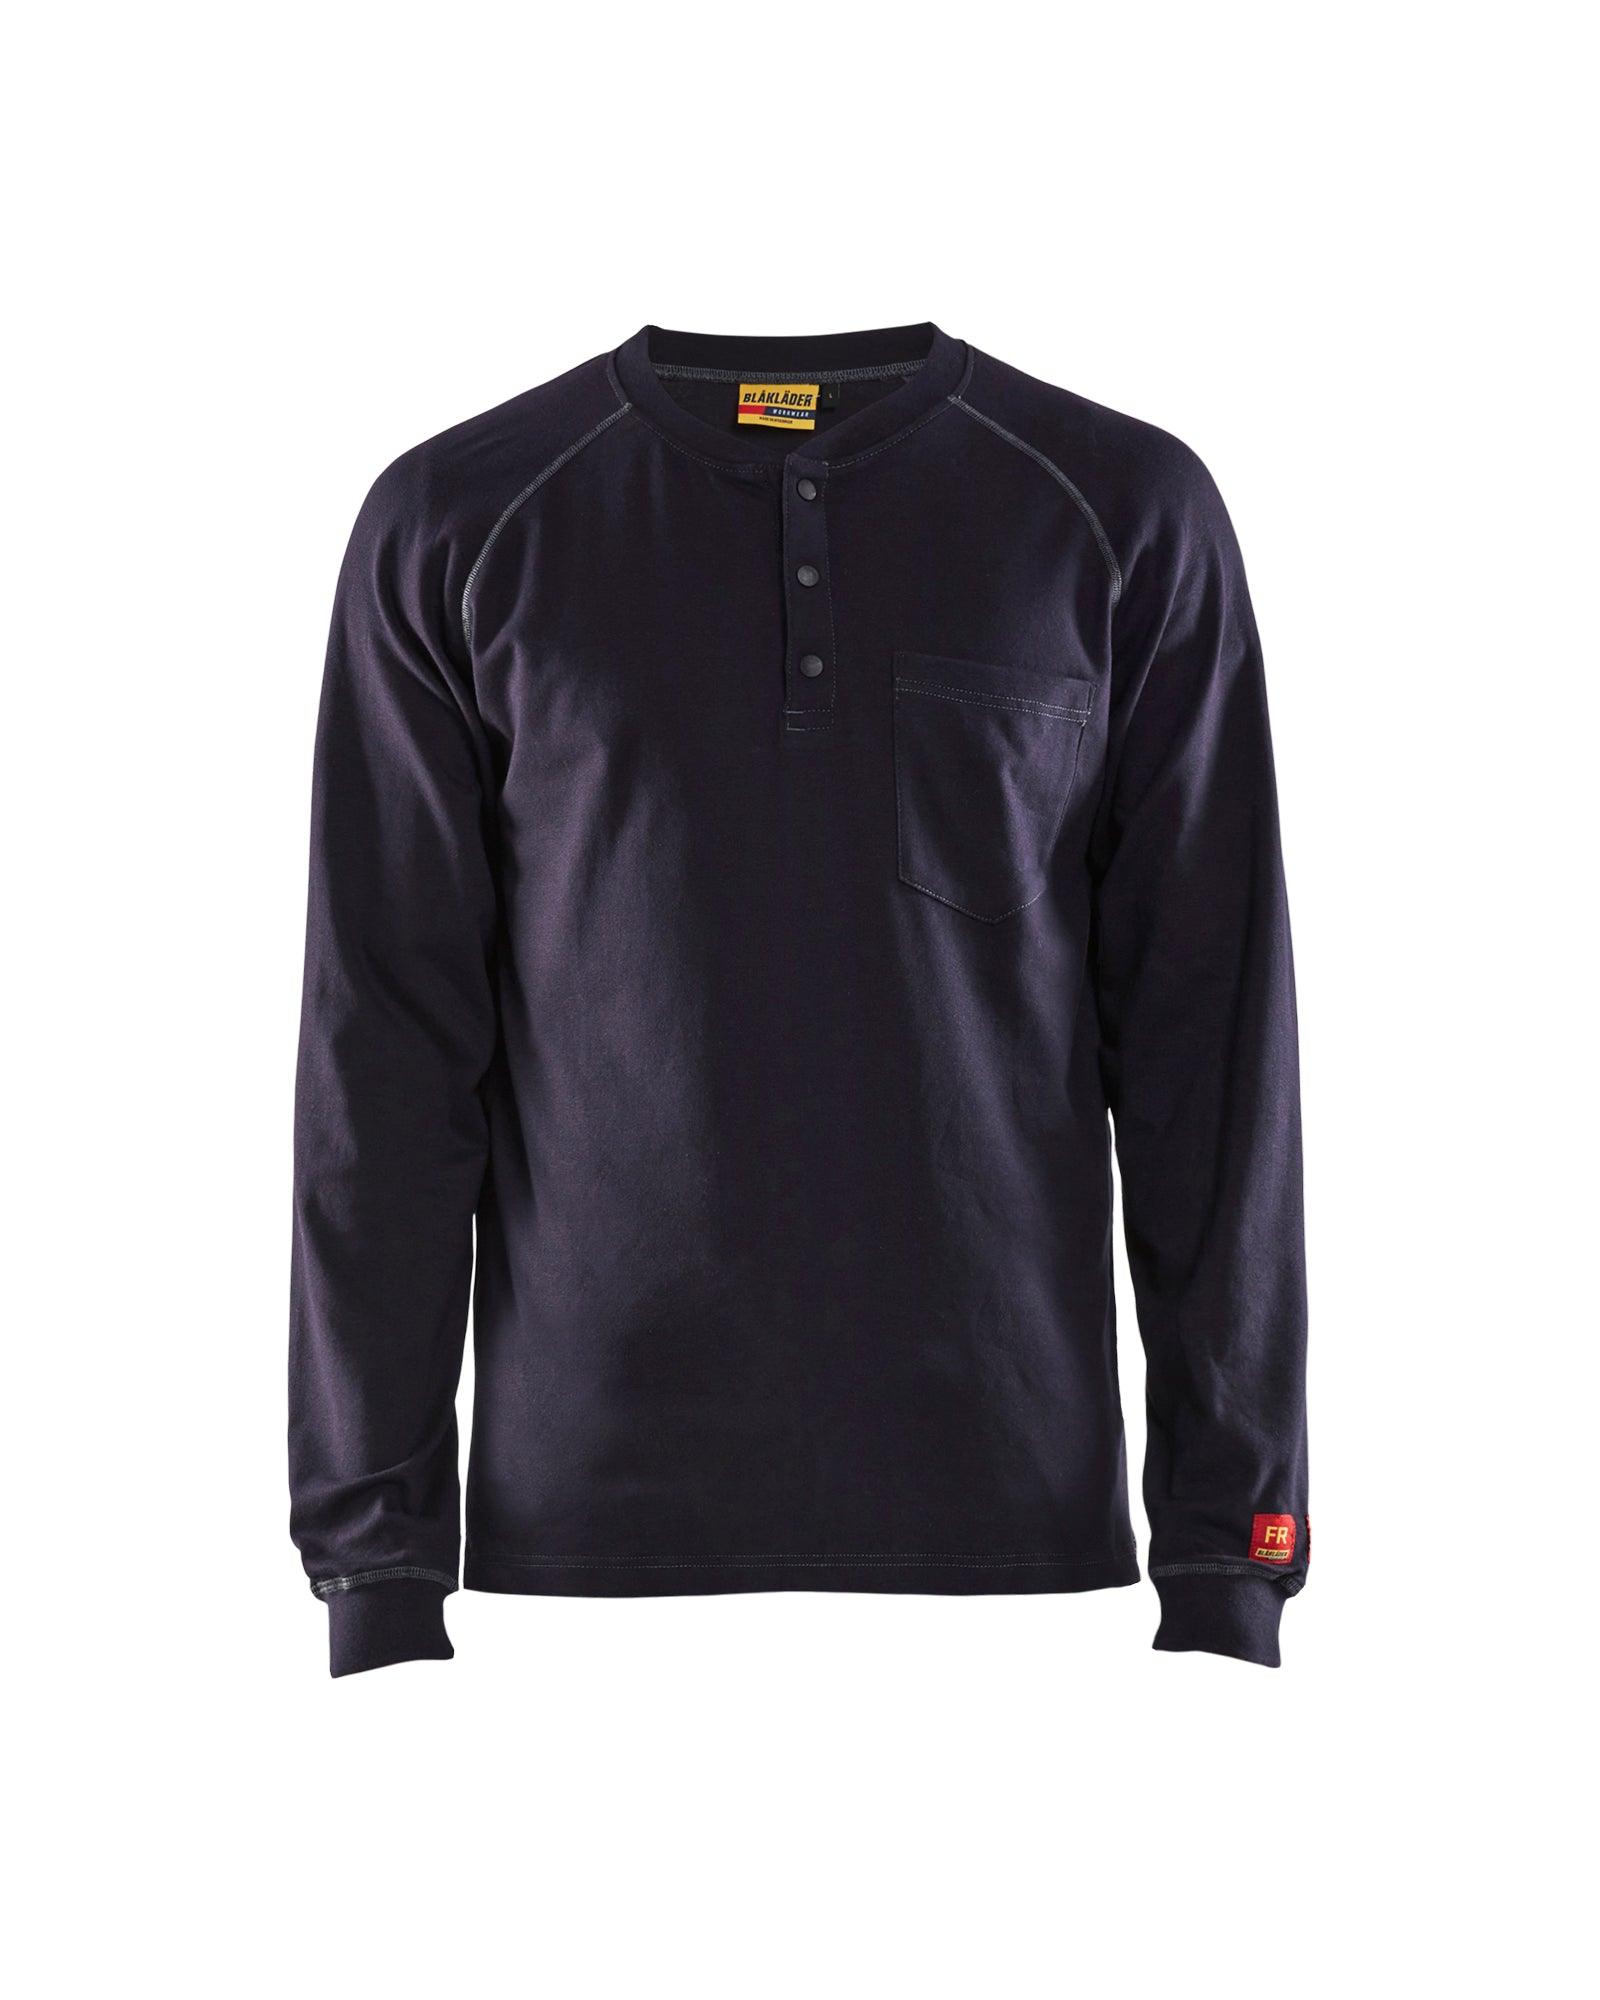 Blaklader 3491 Flame Resistant Henley - Navy Blue - Trusted Gear Company LLC